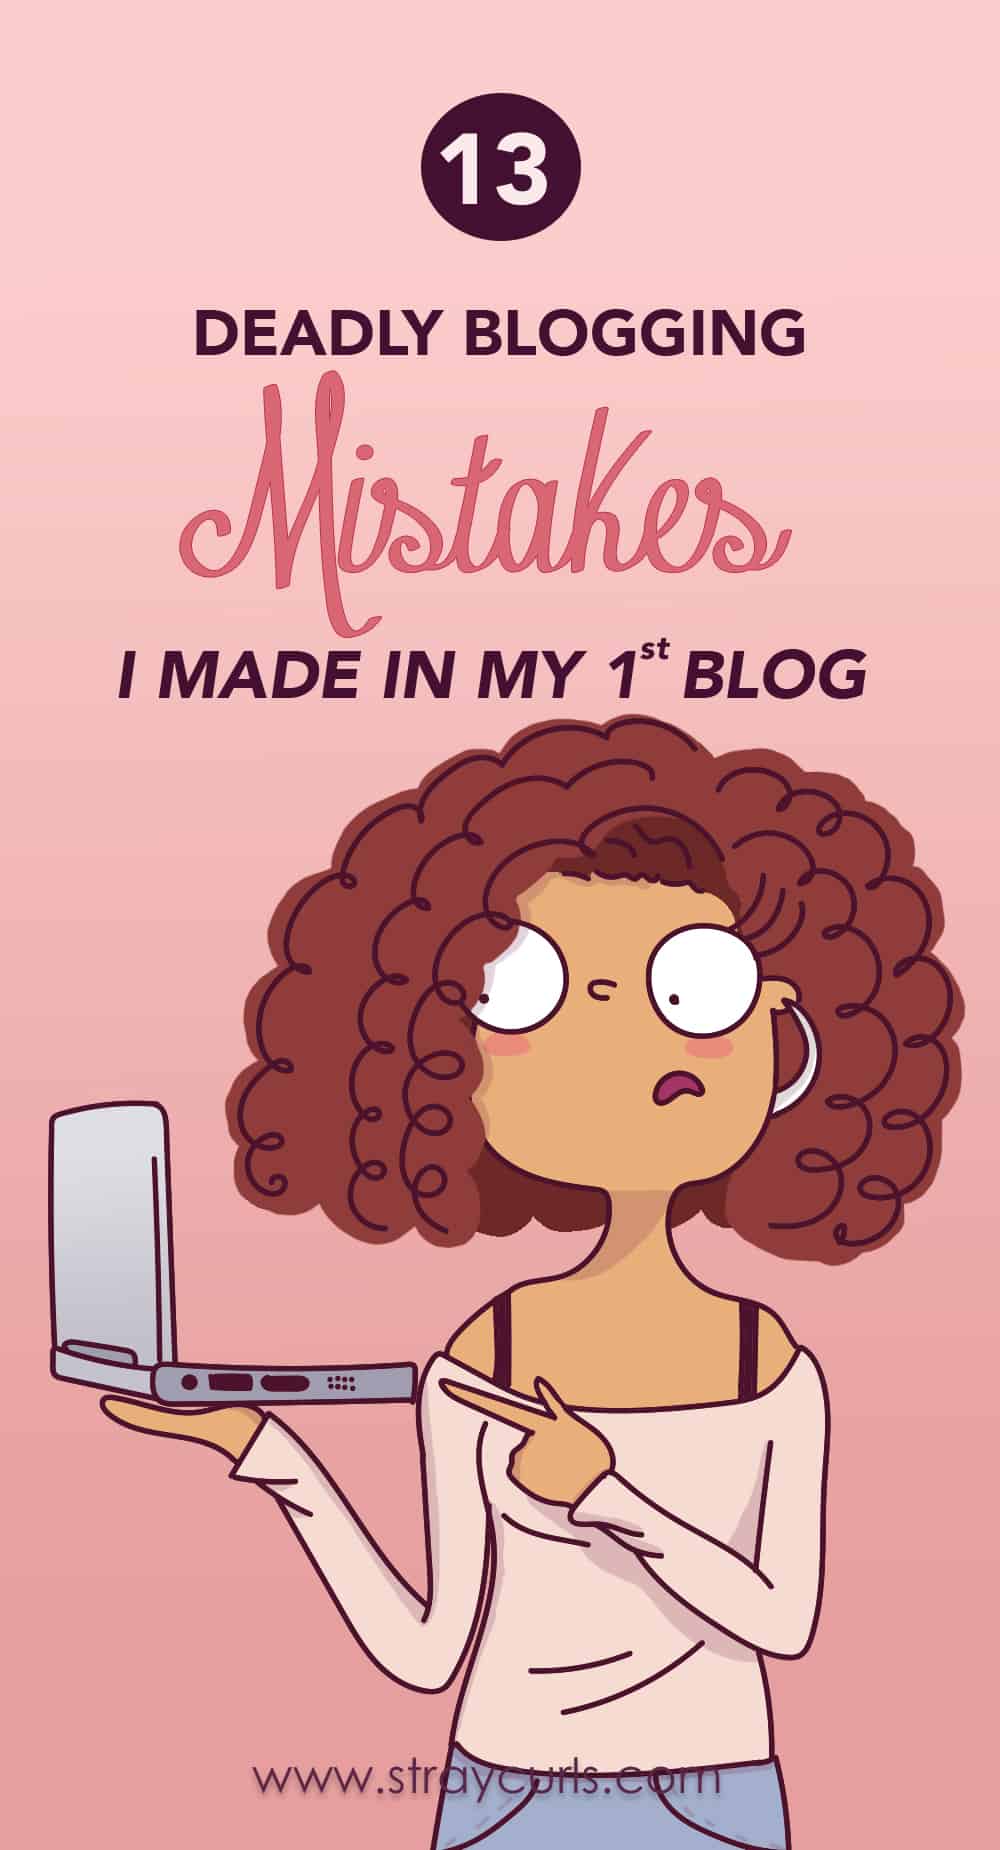 13 deadly blogging mistakes you should avoid! These mistakes are hurting your blog and you should avoid them in order to grow your blog and your blog traffic! Learn how to start your blog the right way! #girlboss #lifestyle #blog #blogging #bloggingtips Girl holding laptop illustration.